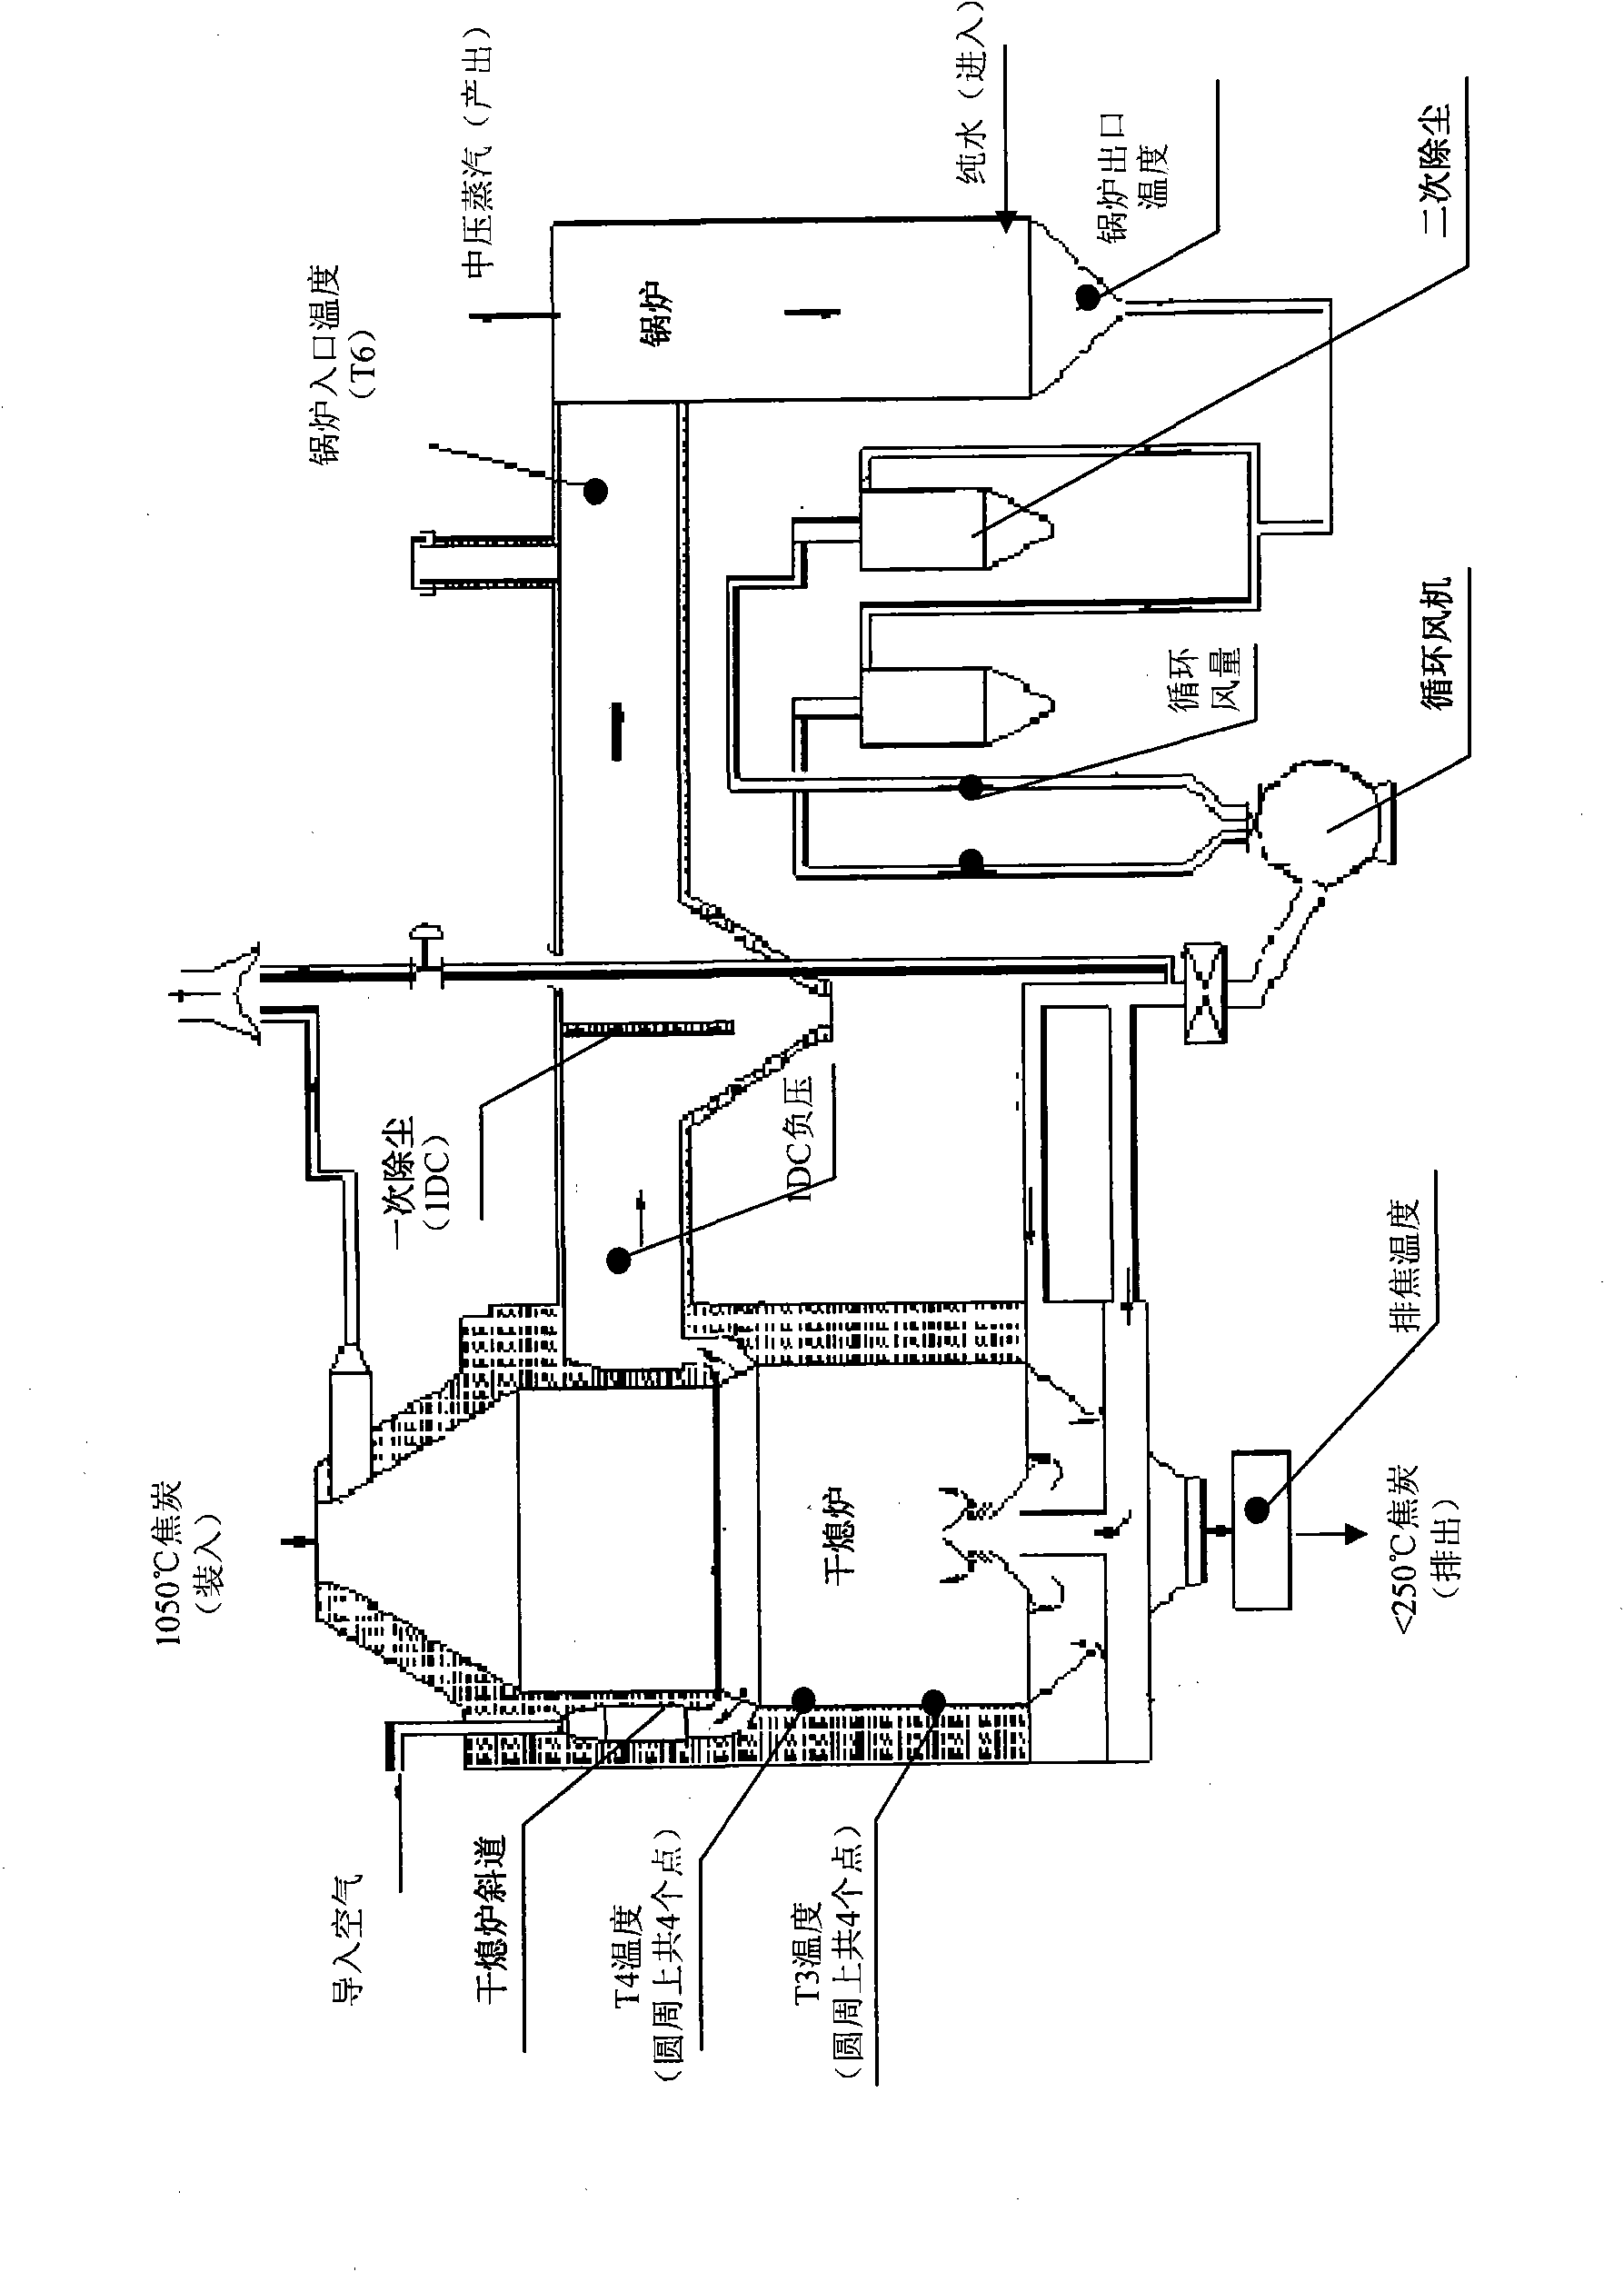 Temperature and pressure control method of dry quenched coke circulating system